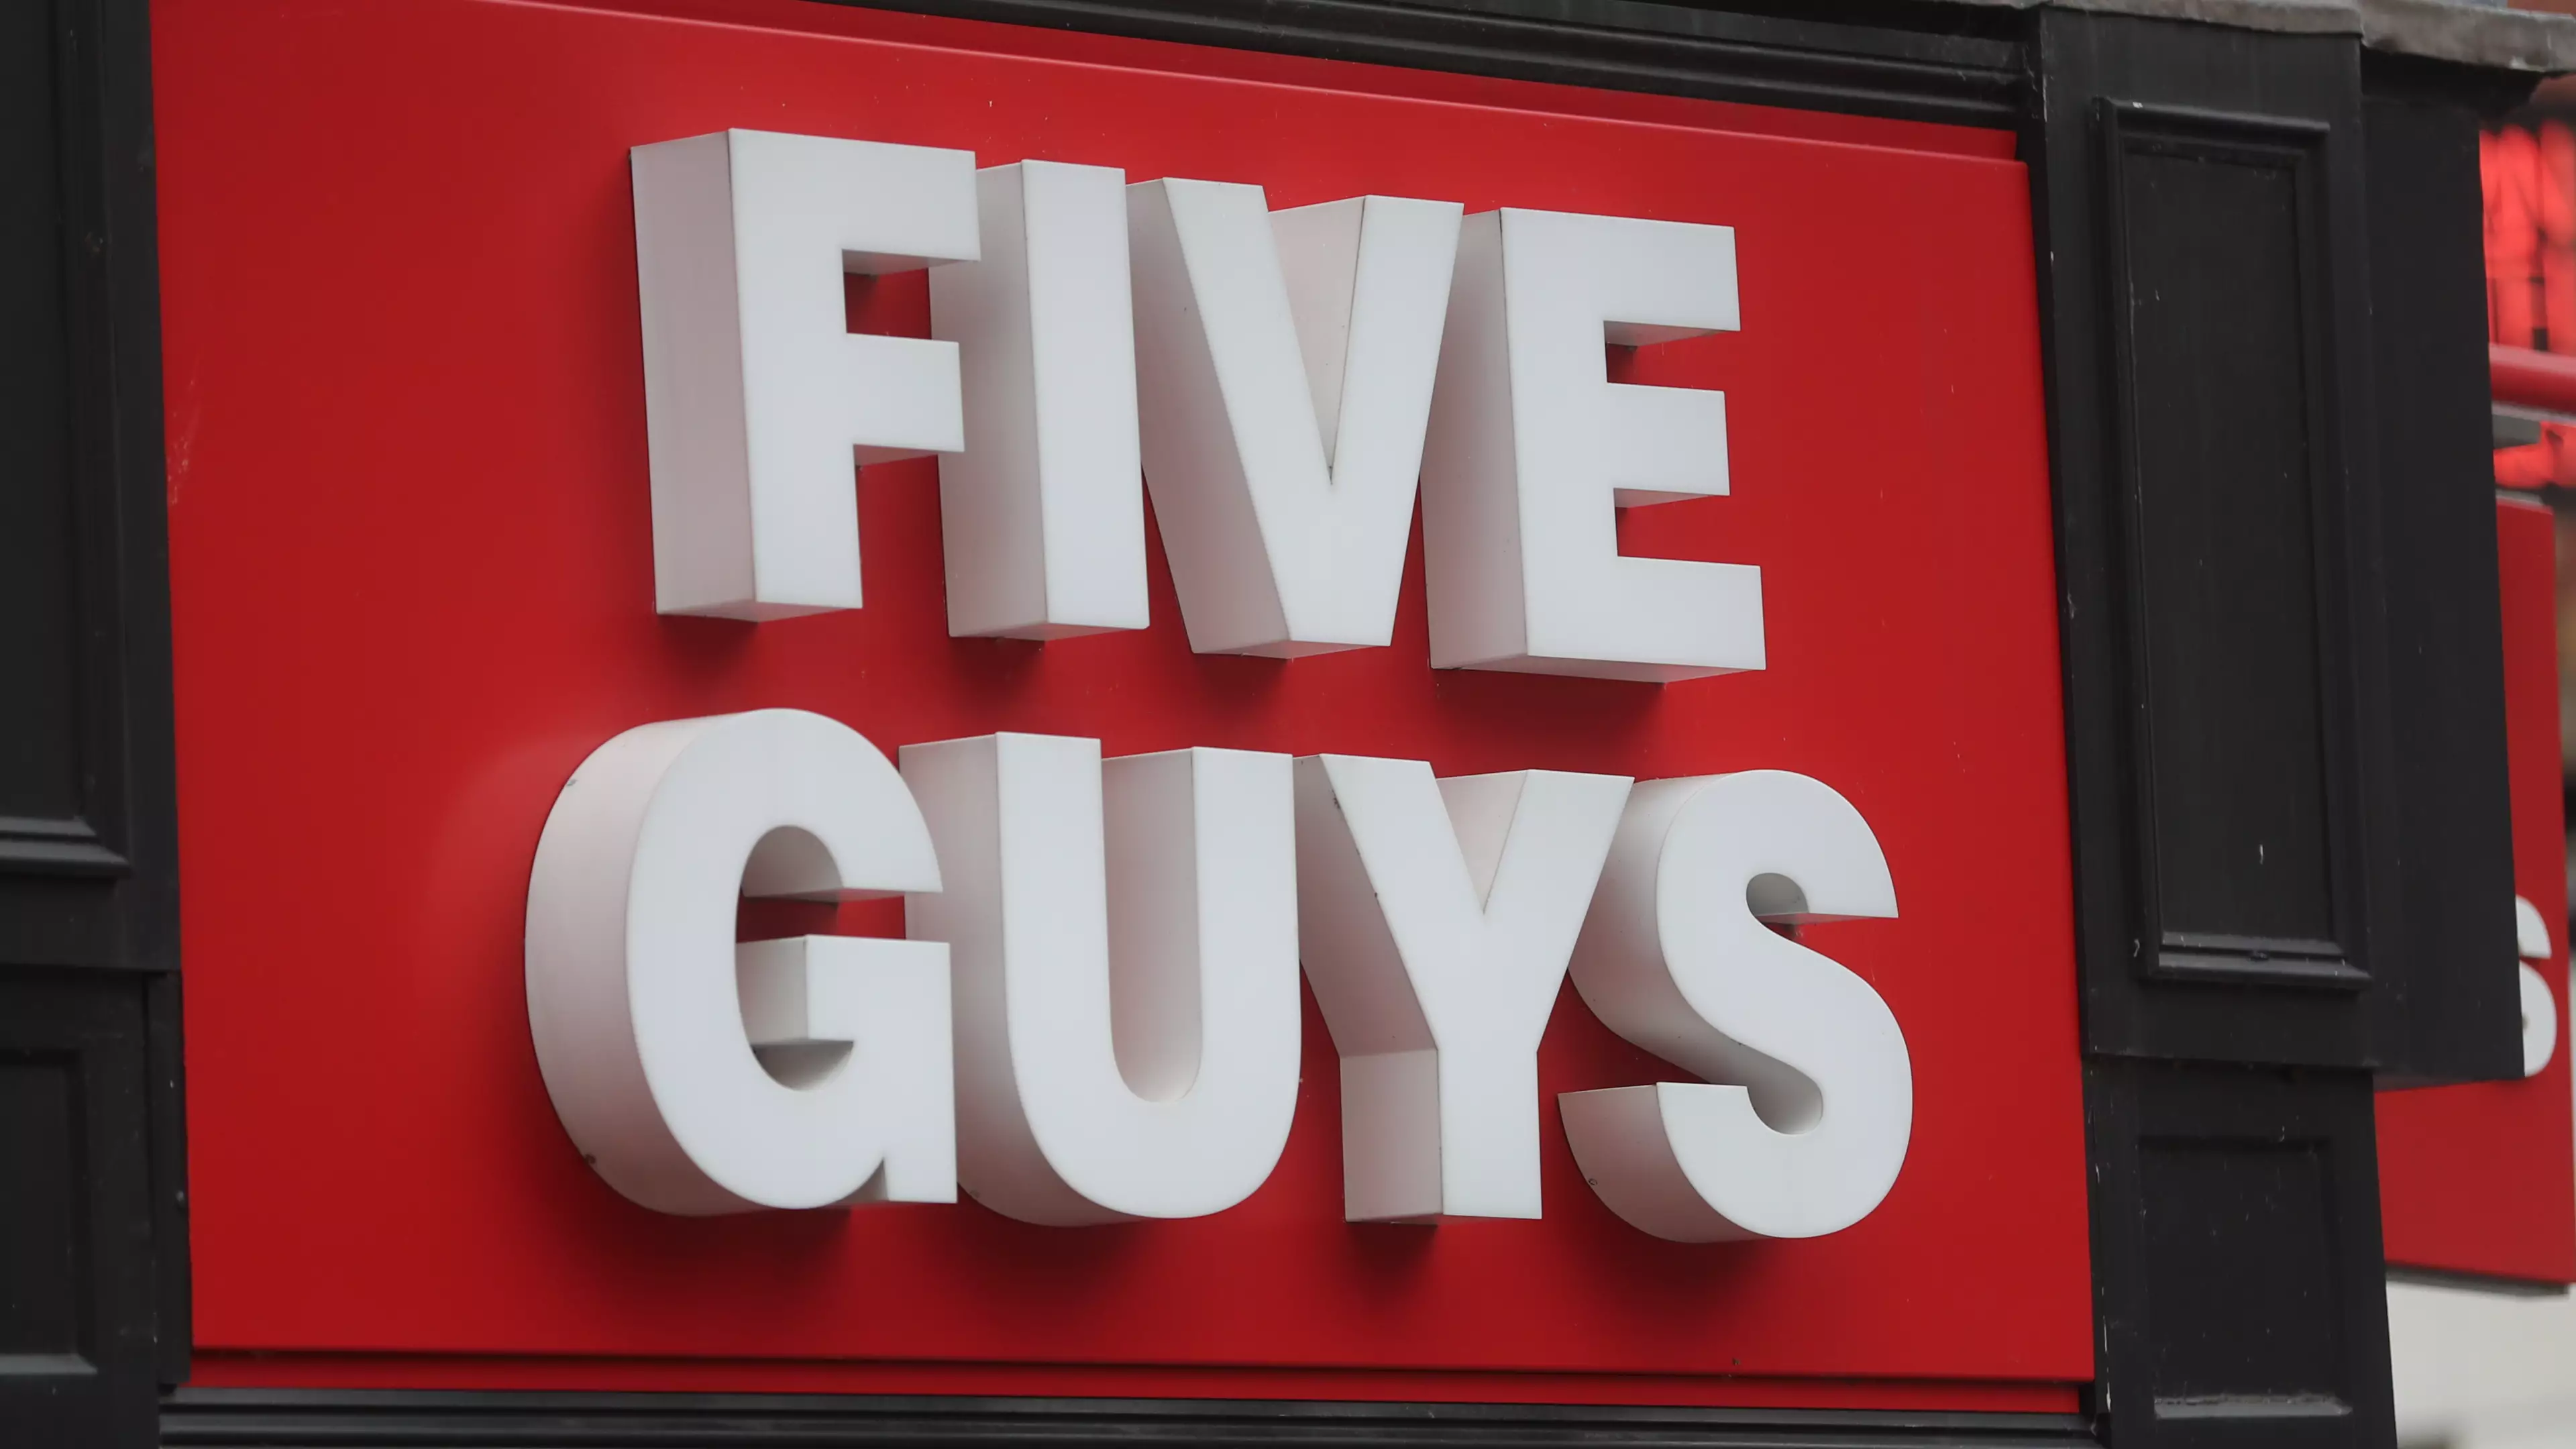 Cult American Burger Chain Five Guys Is Coming To Australia And New Zealand